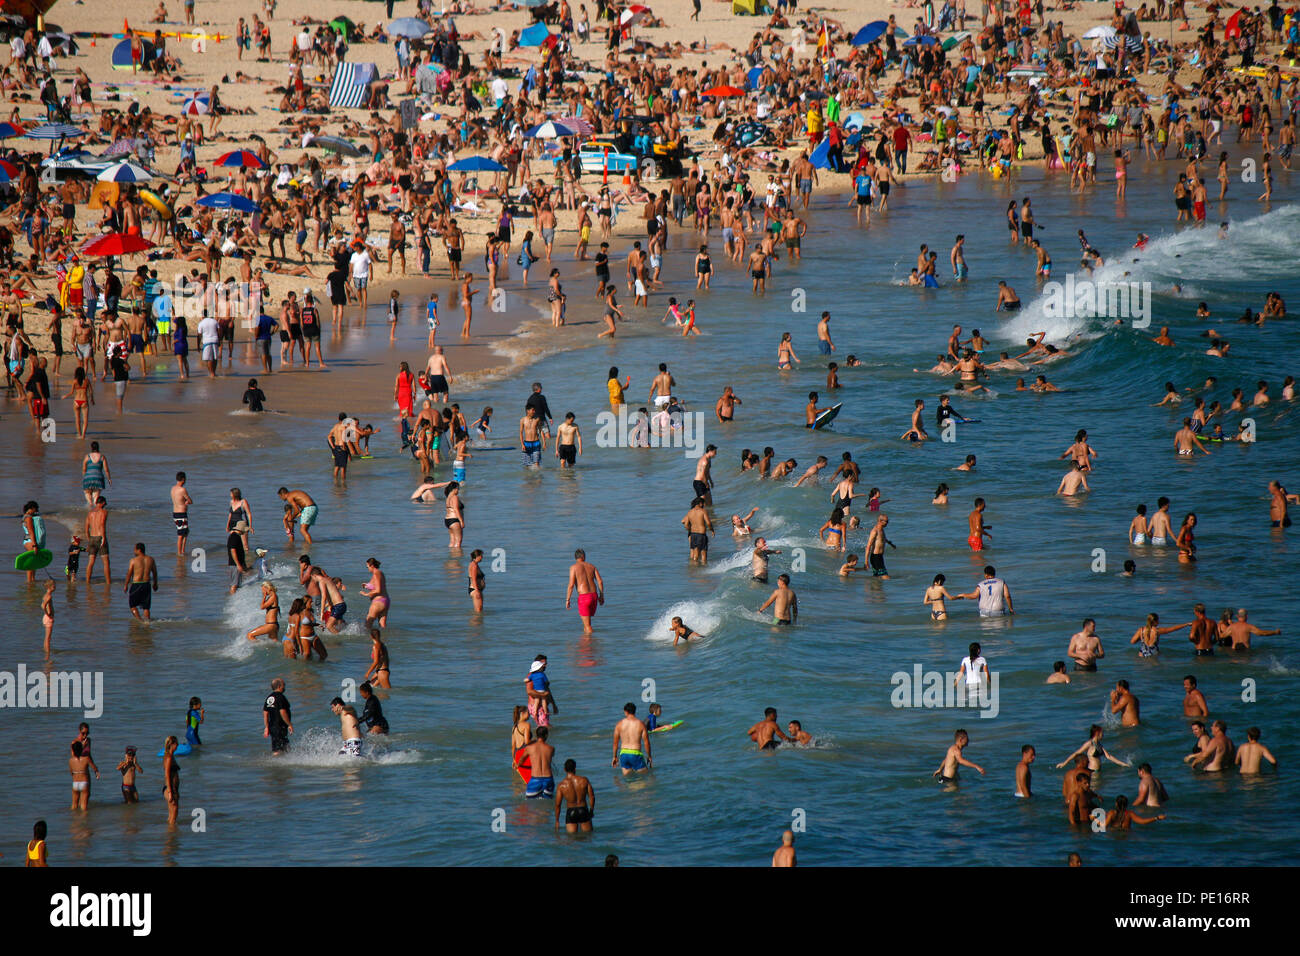 December 30, 2017: Temperatures over 35 degrees Celsius pull masses of people to the crowded city beaches of Sydney, here Bondi Beach, Sydney, Austral Stock Photo